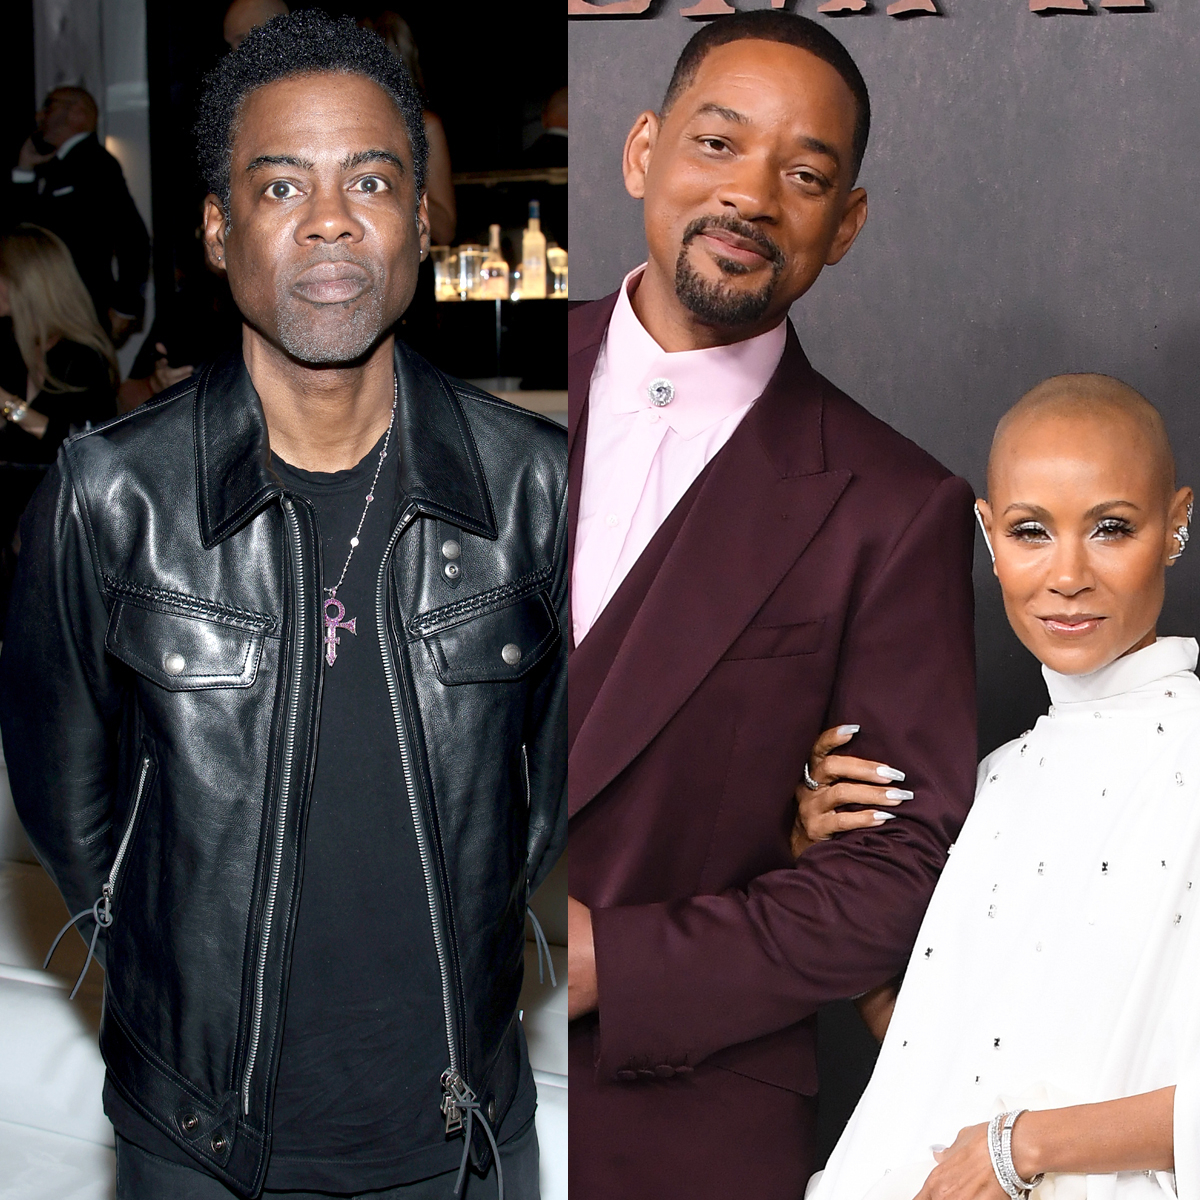 Chris Rock Says Will Smith Has “Selective Outrage” With Oscars Slap During Netflix Comedy Special – E! Online